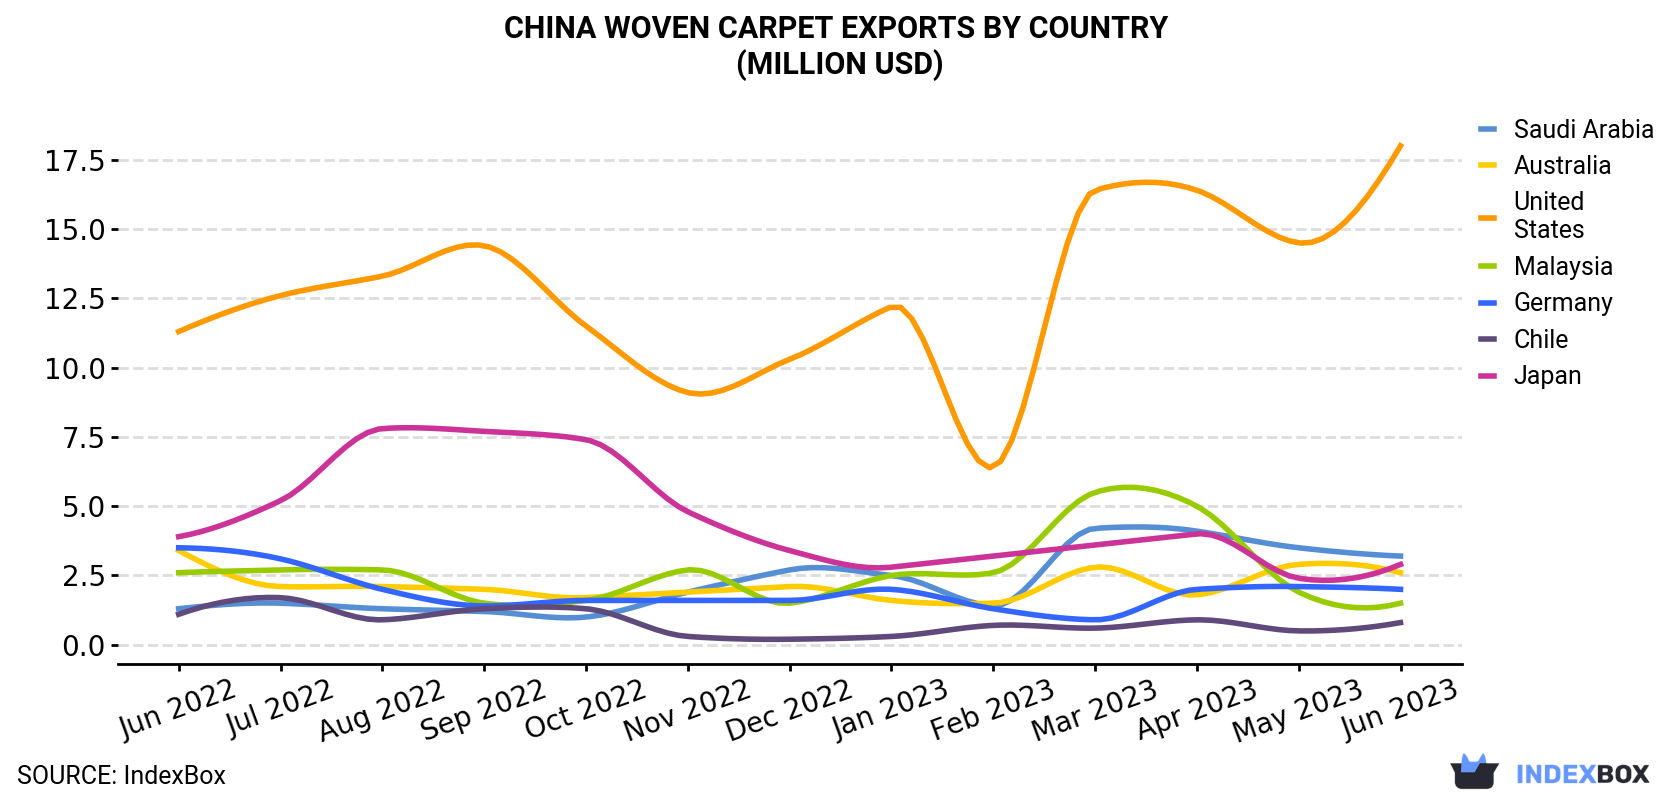 China Woven Carpet Exports By Country (Million USD)